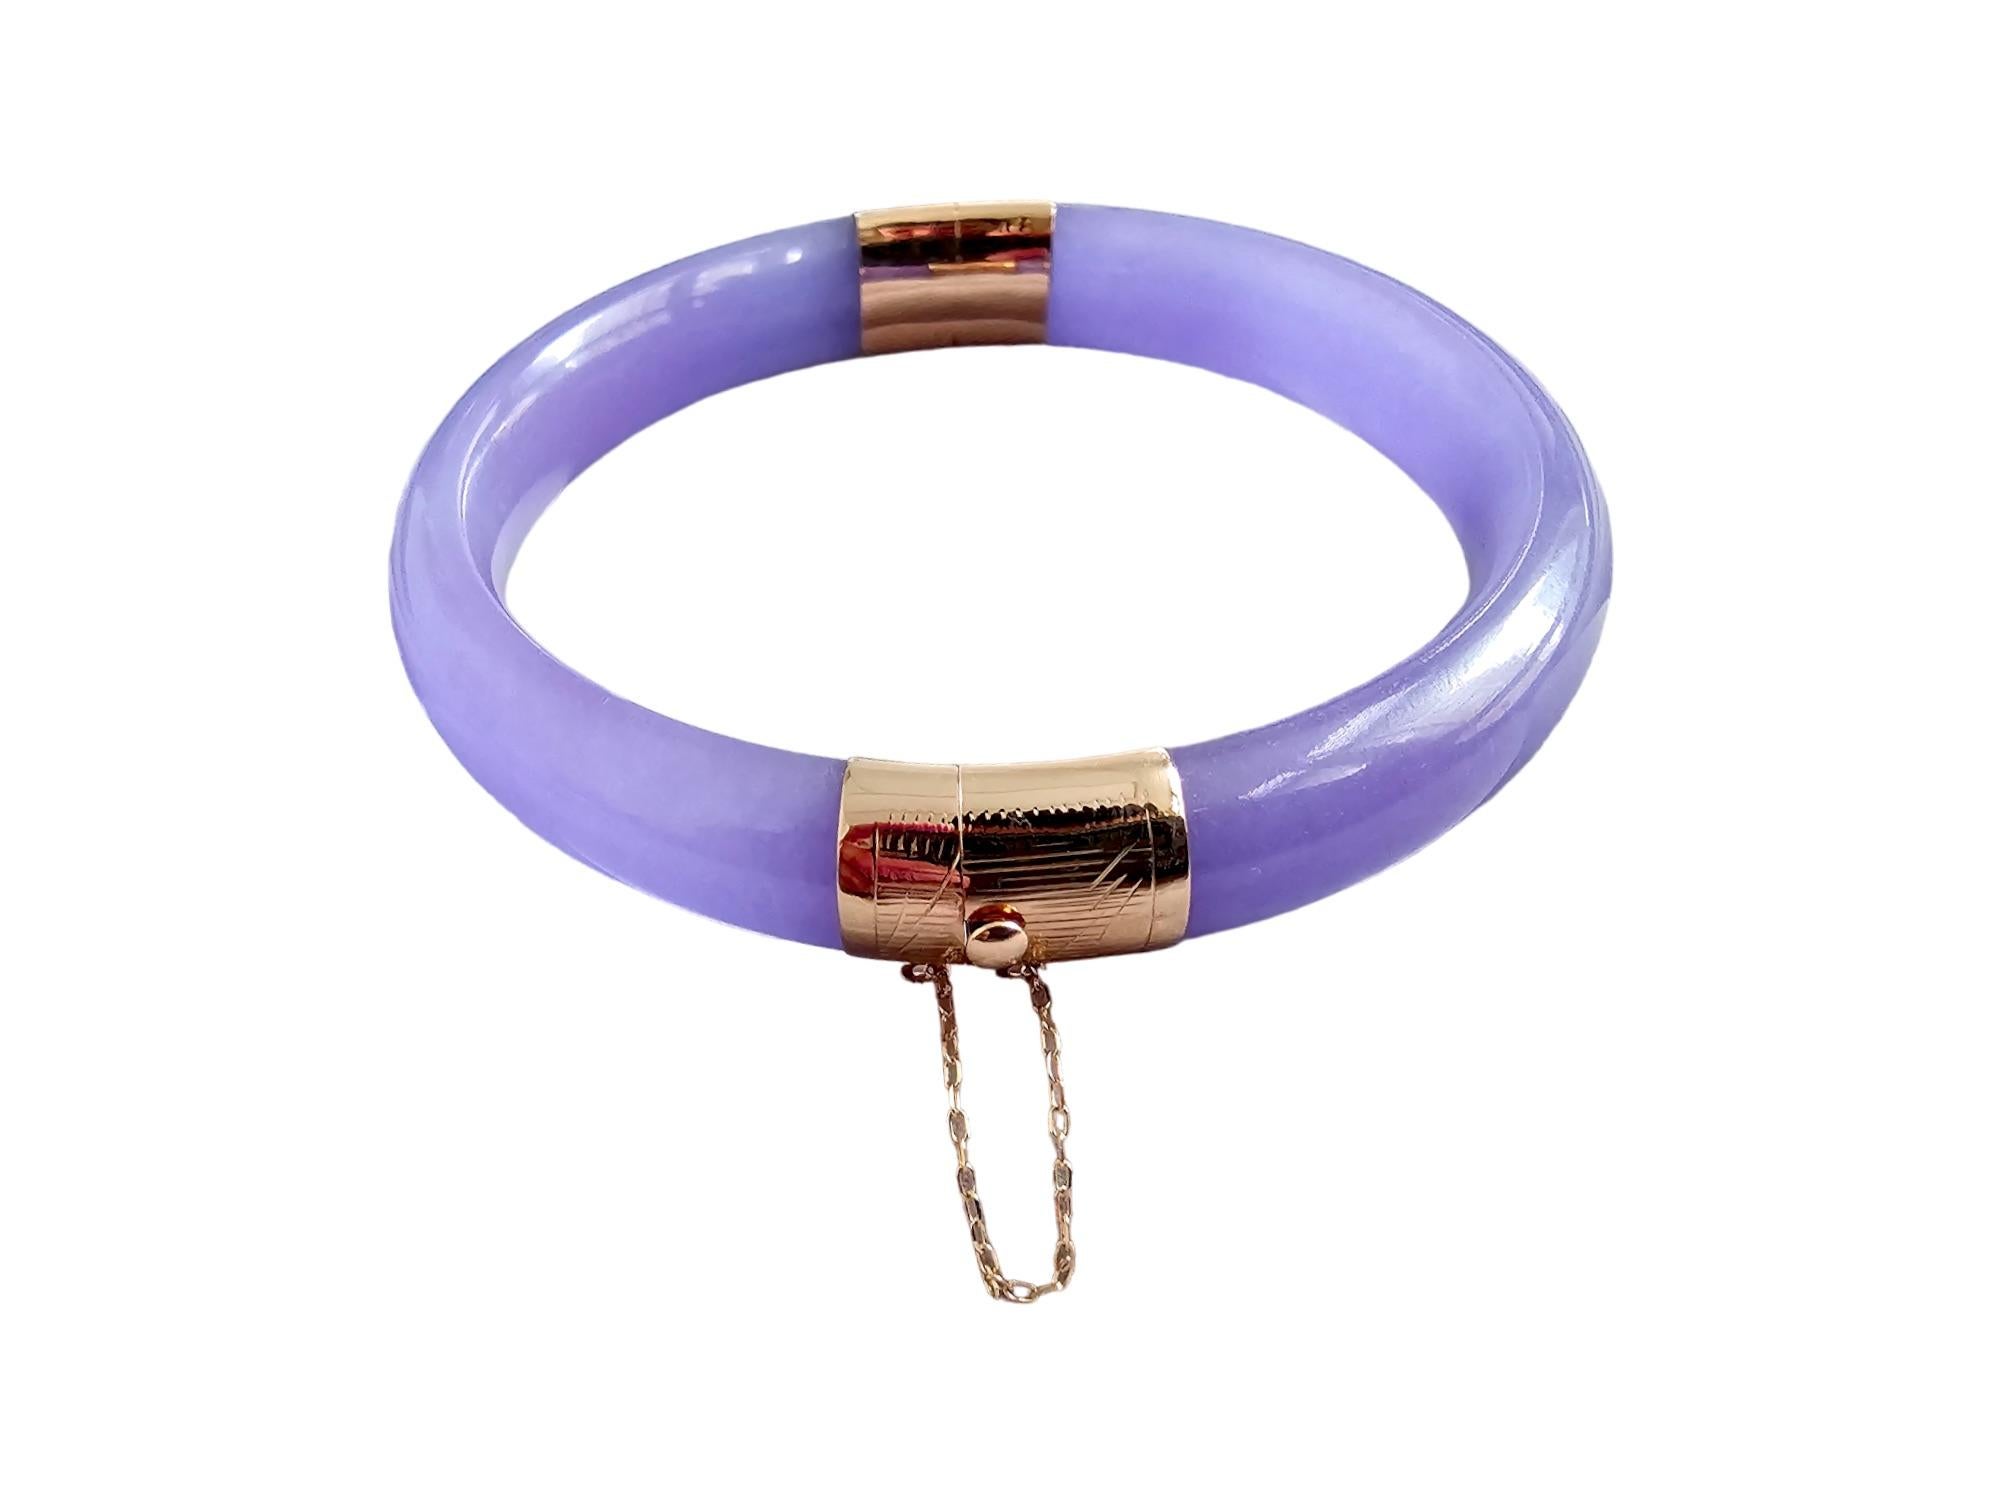 Viceroy's Circular Lavender Jade Bangle Bracelet (with 14K Yellow Gold) For Sale 3